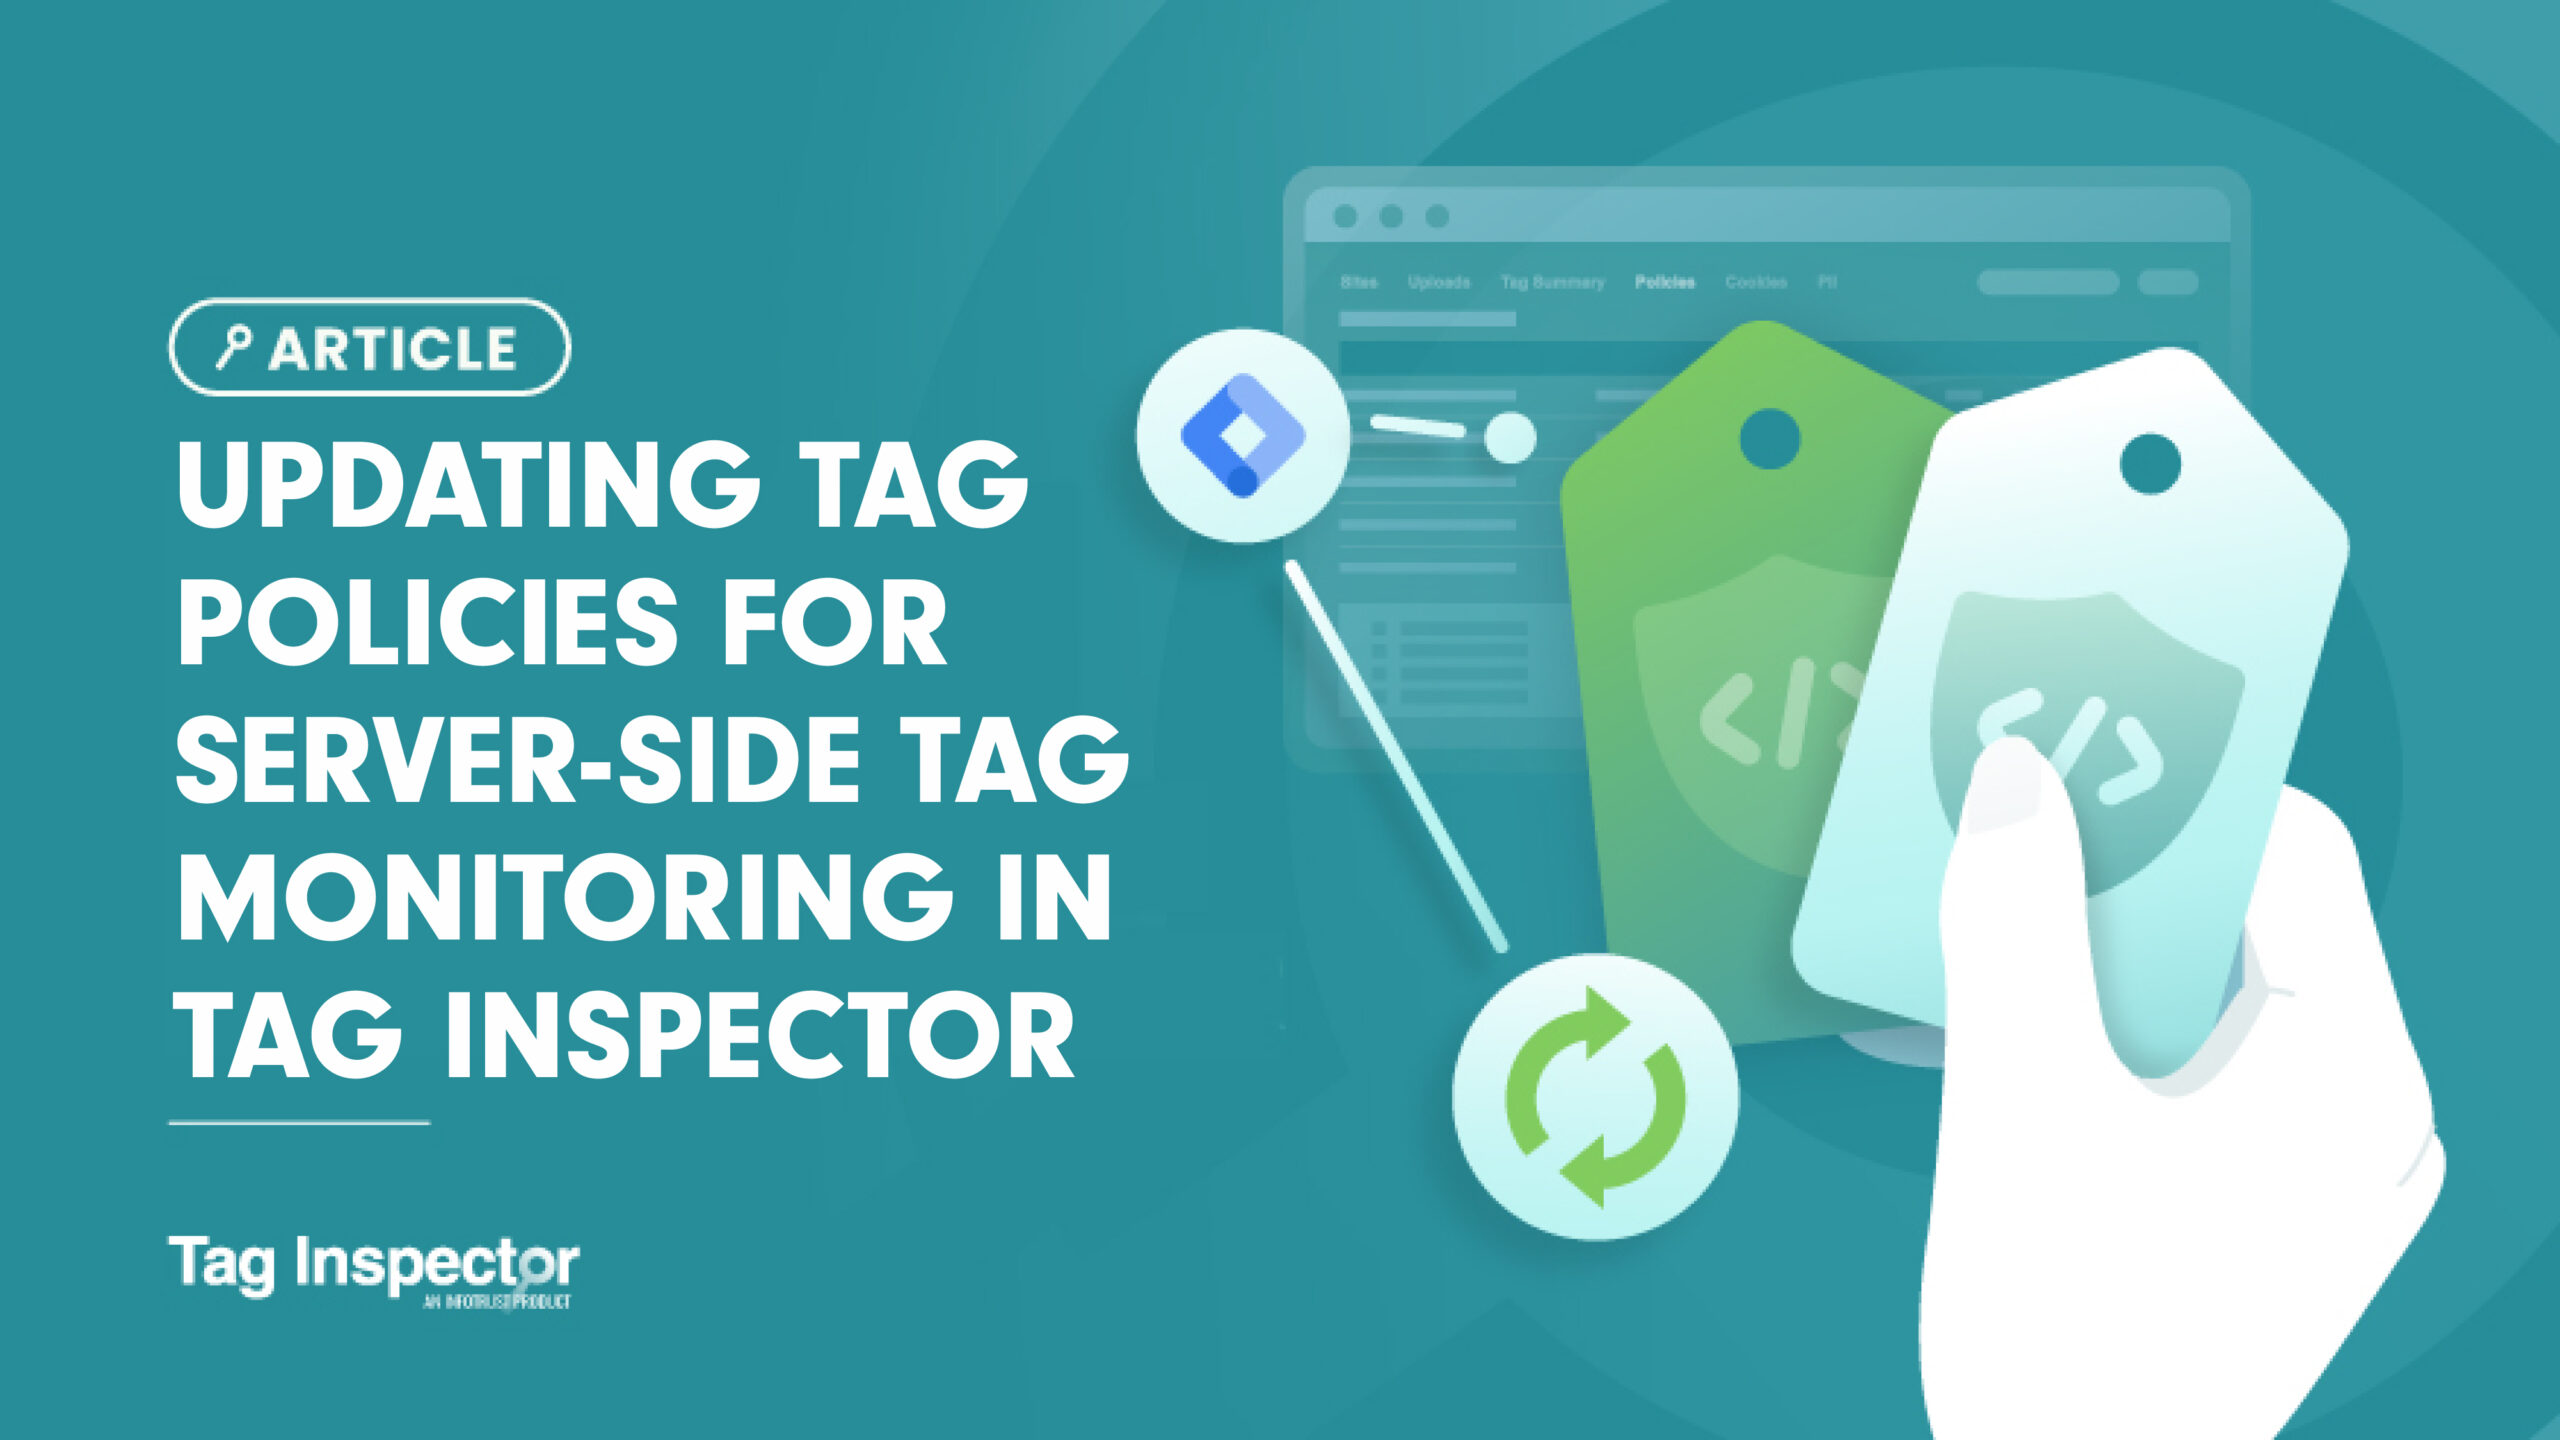 [[Draft]] Updating Tag Policies for Server-side Tag Monitoring in Tag Inspector